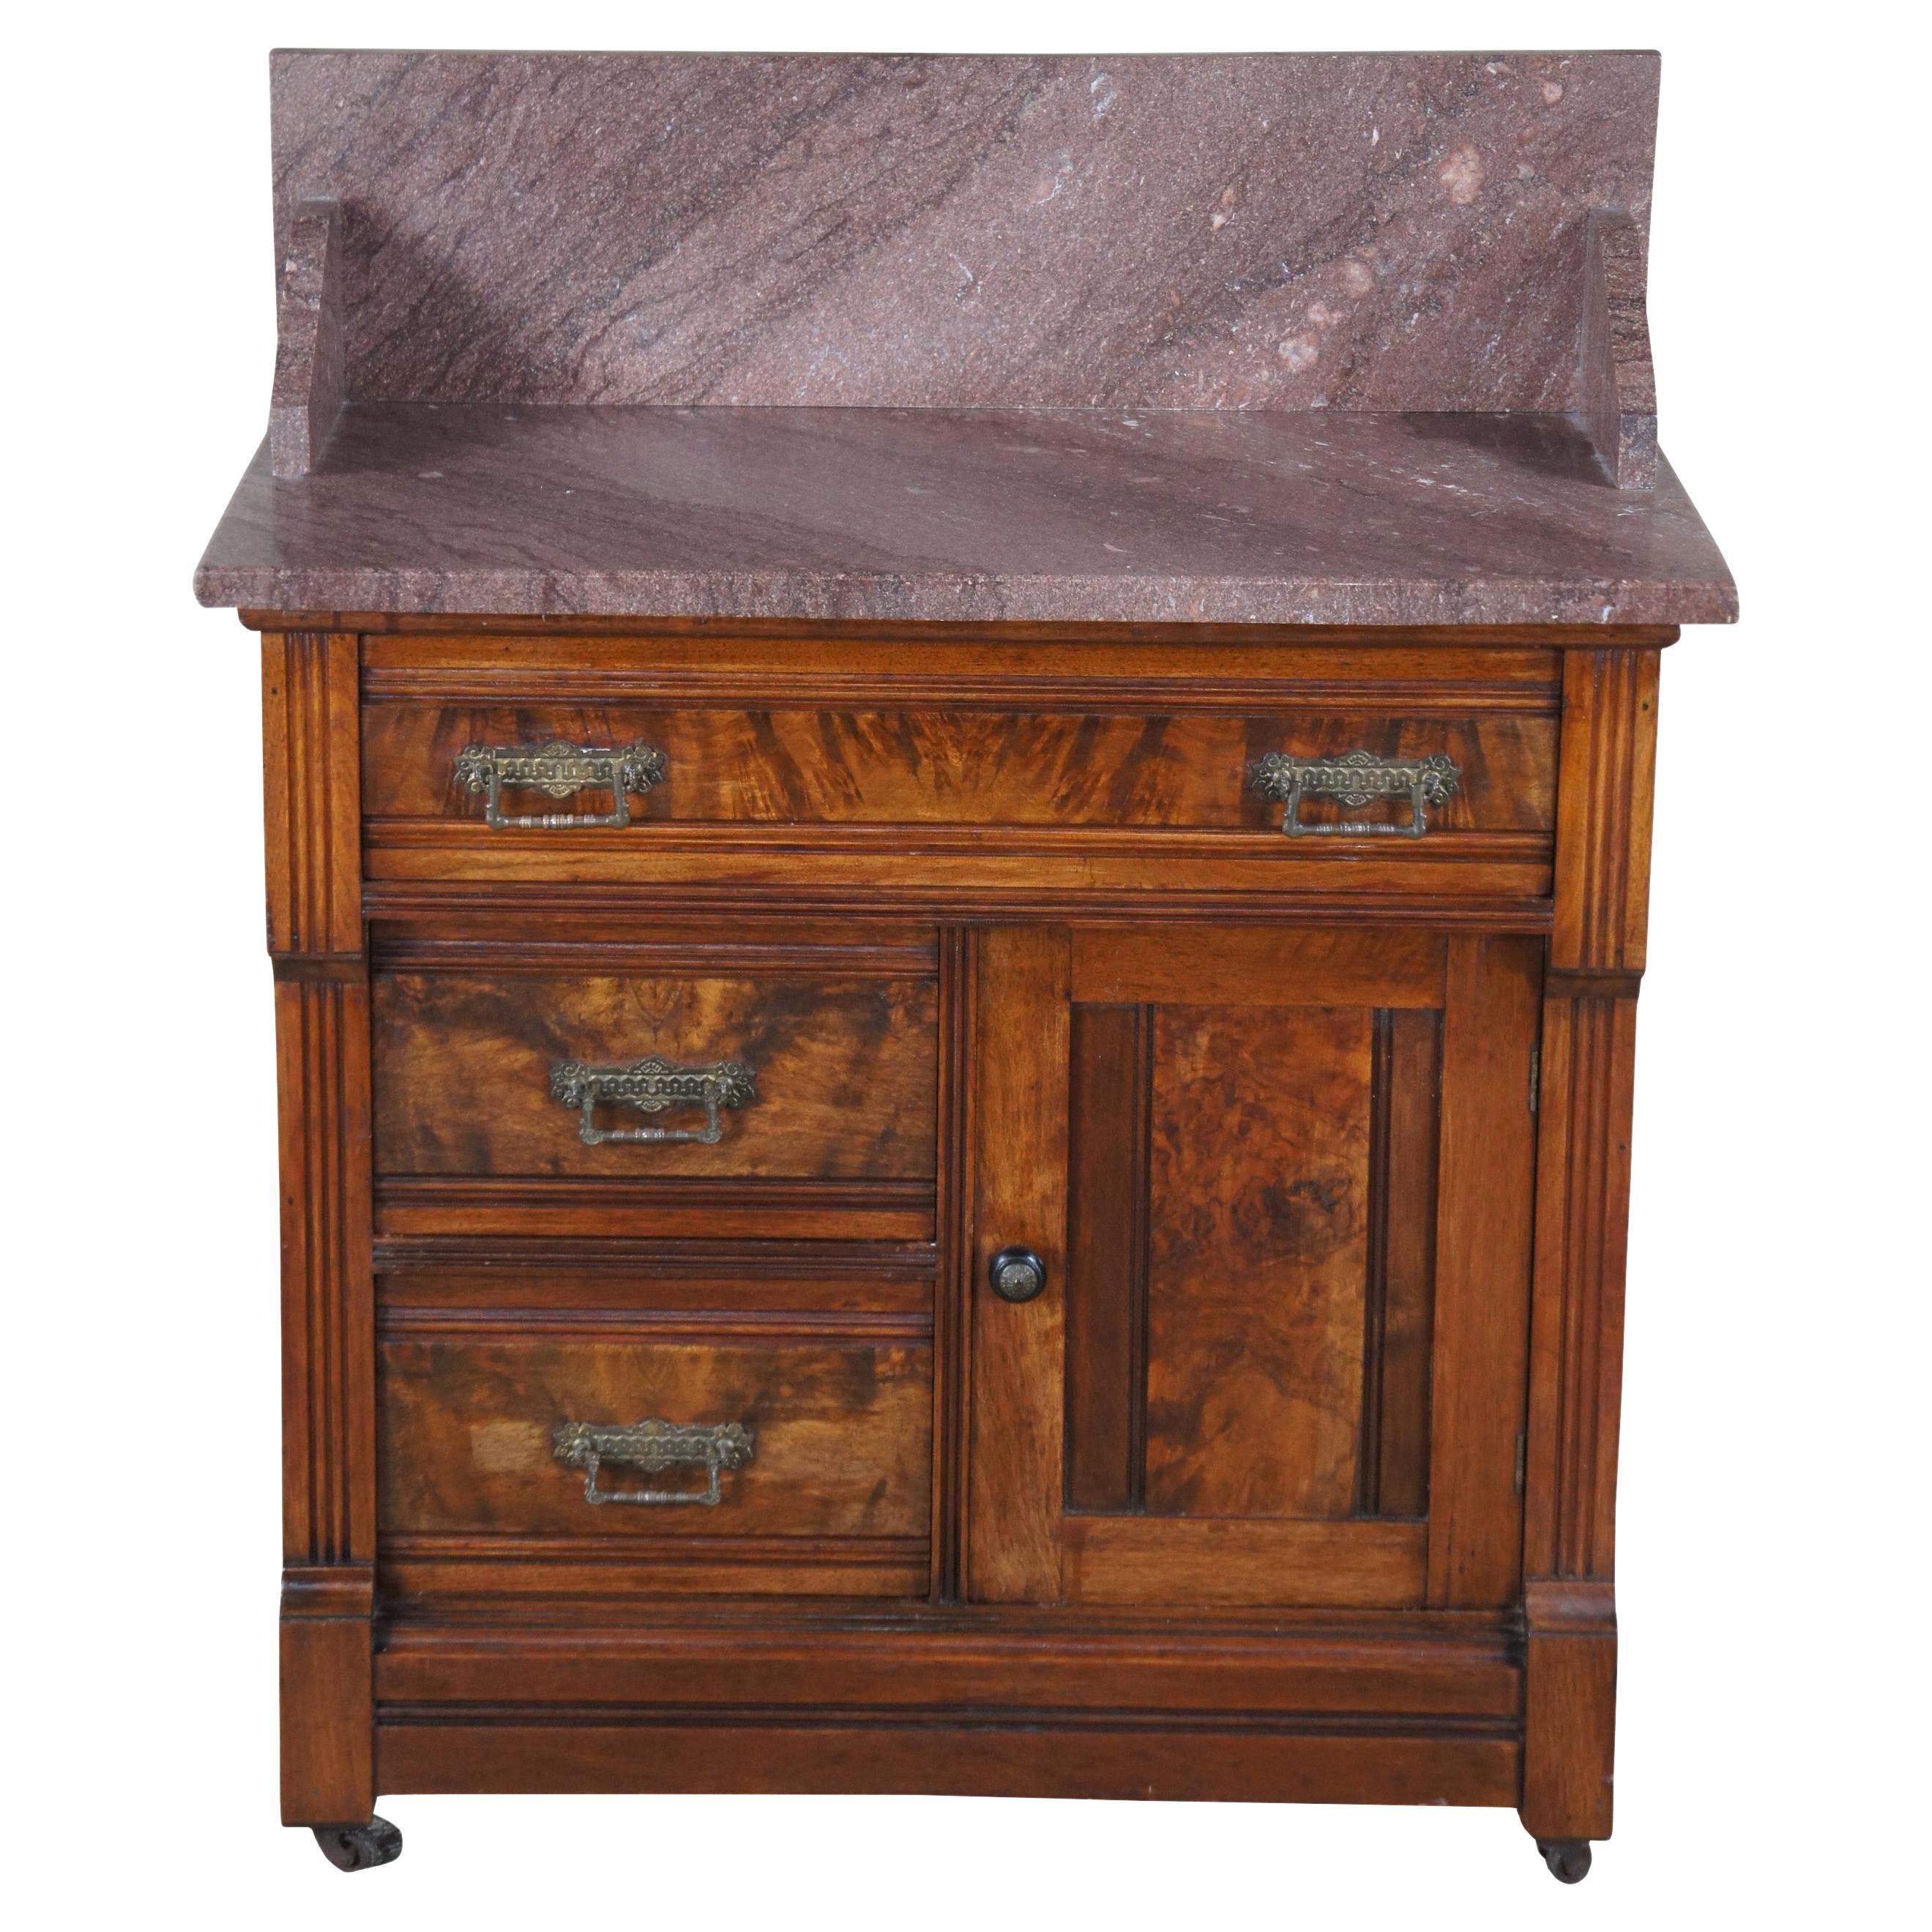 Antique Victorian Eastlake Walnut Burl Wash Stand Chest Commode Side Table